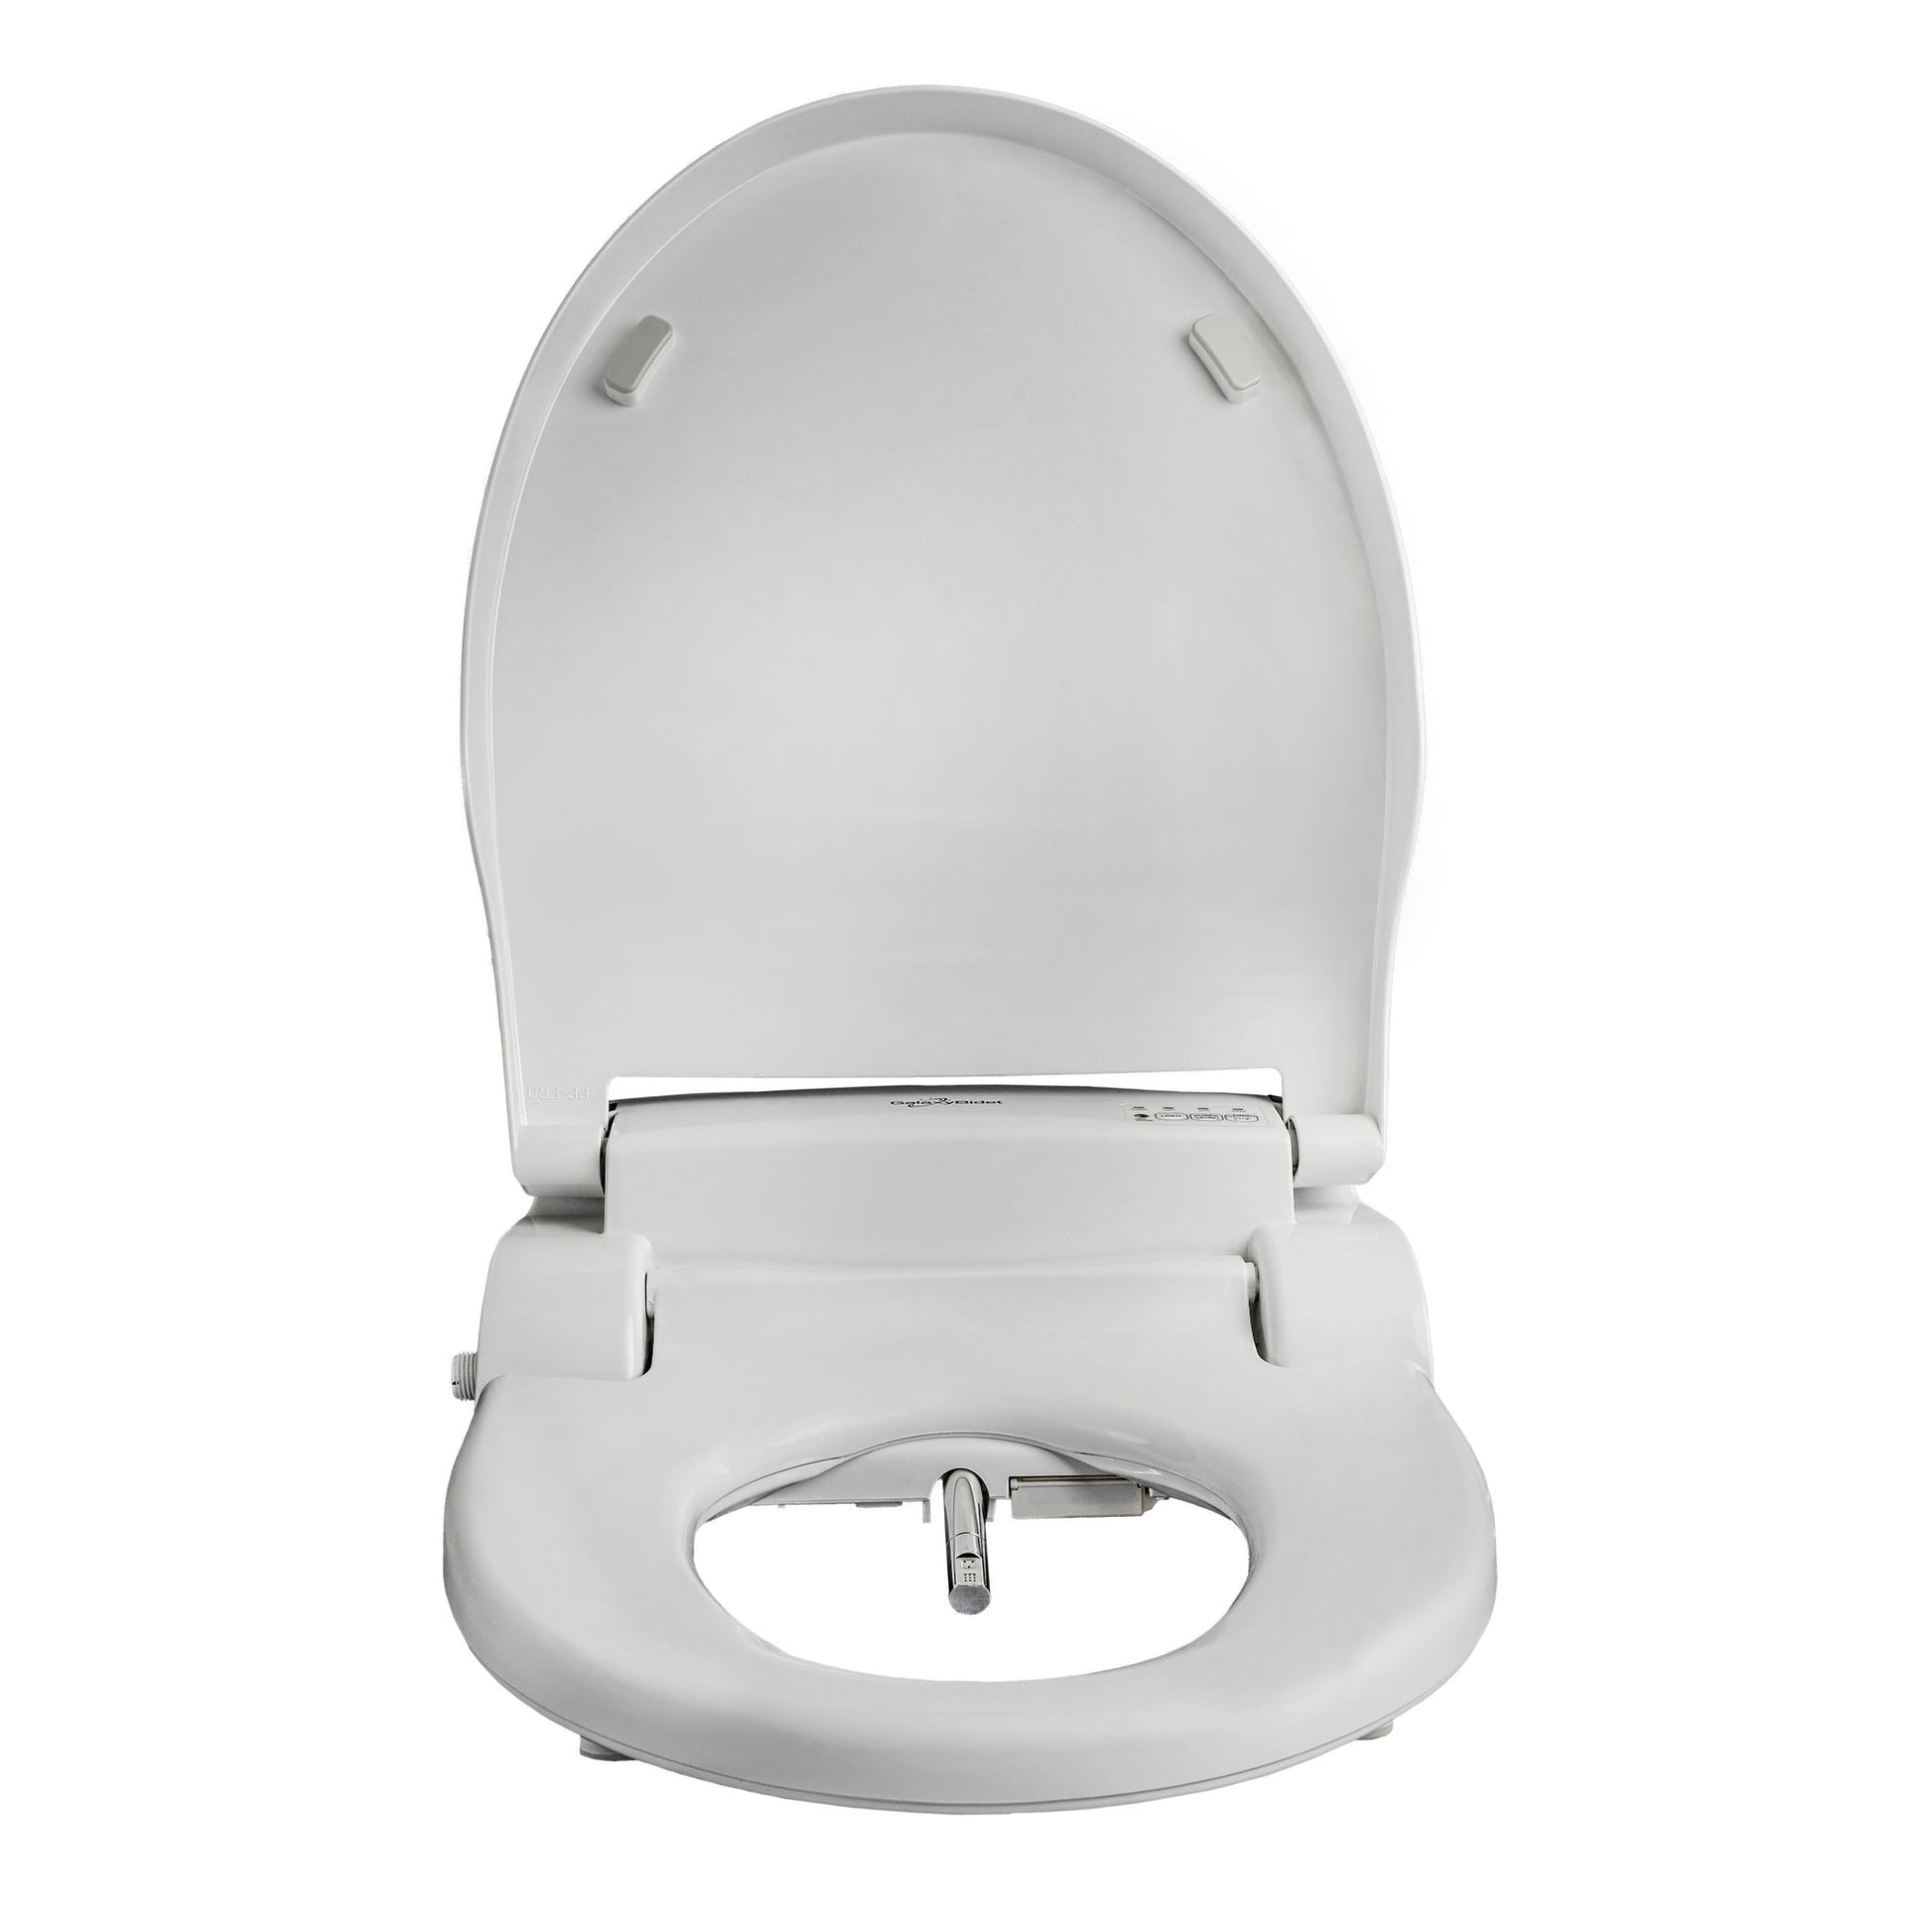 Galaxy GB-5000-EW White Hybrid Heating-System Elongated Bidet Seat With Remote Control and LED Night Light